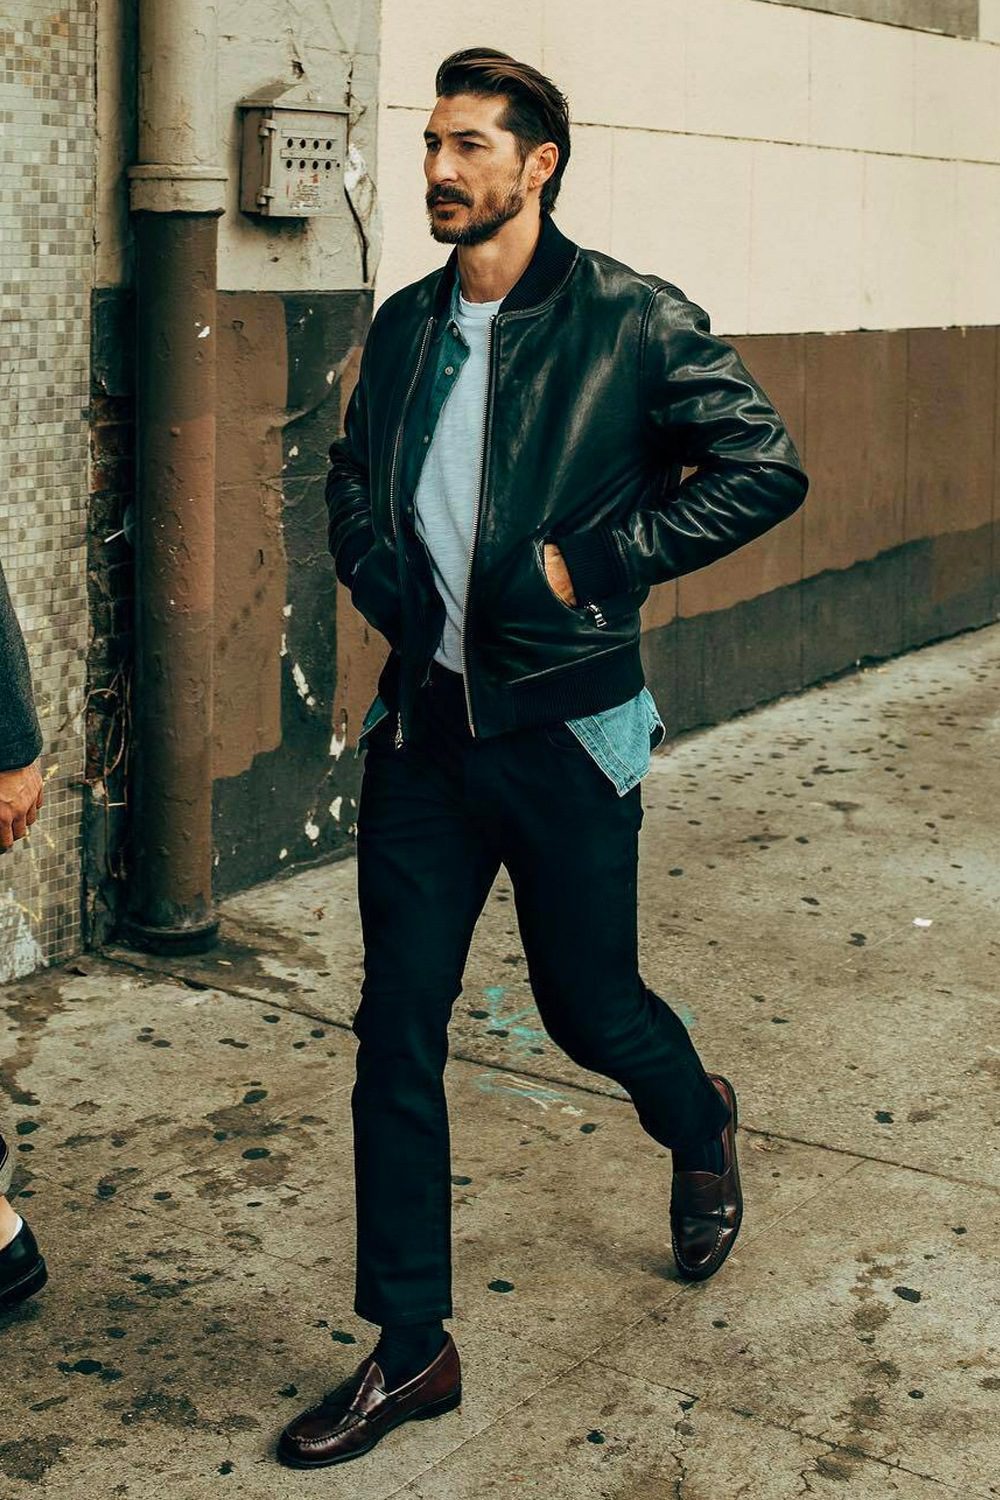 Leather Jackets & Mid-Layer Pieces for Men